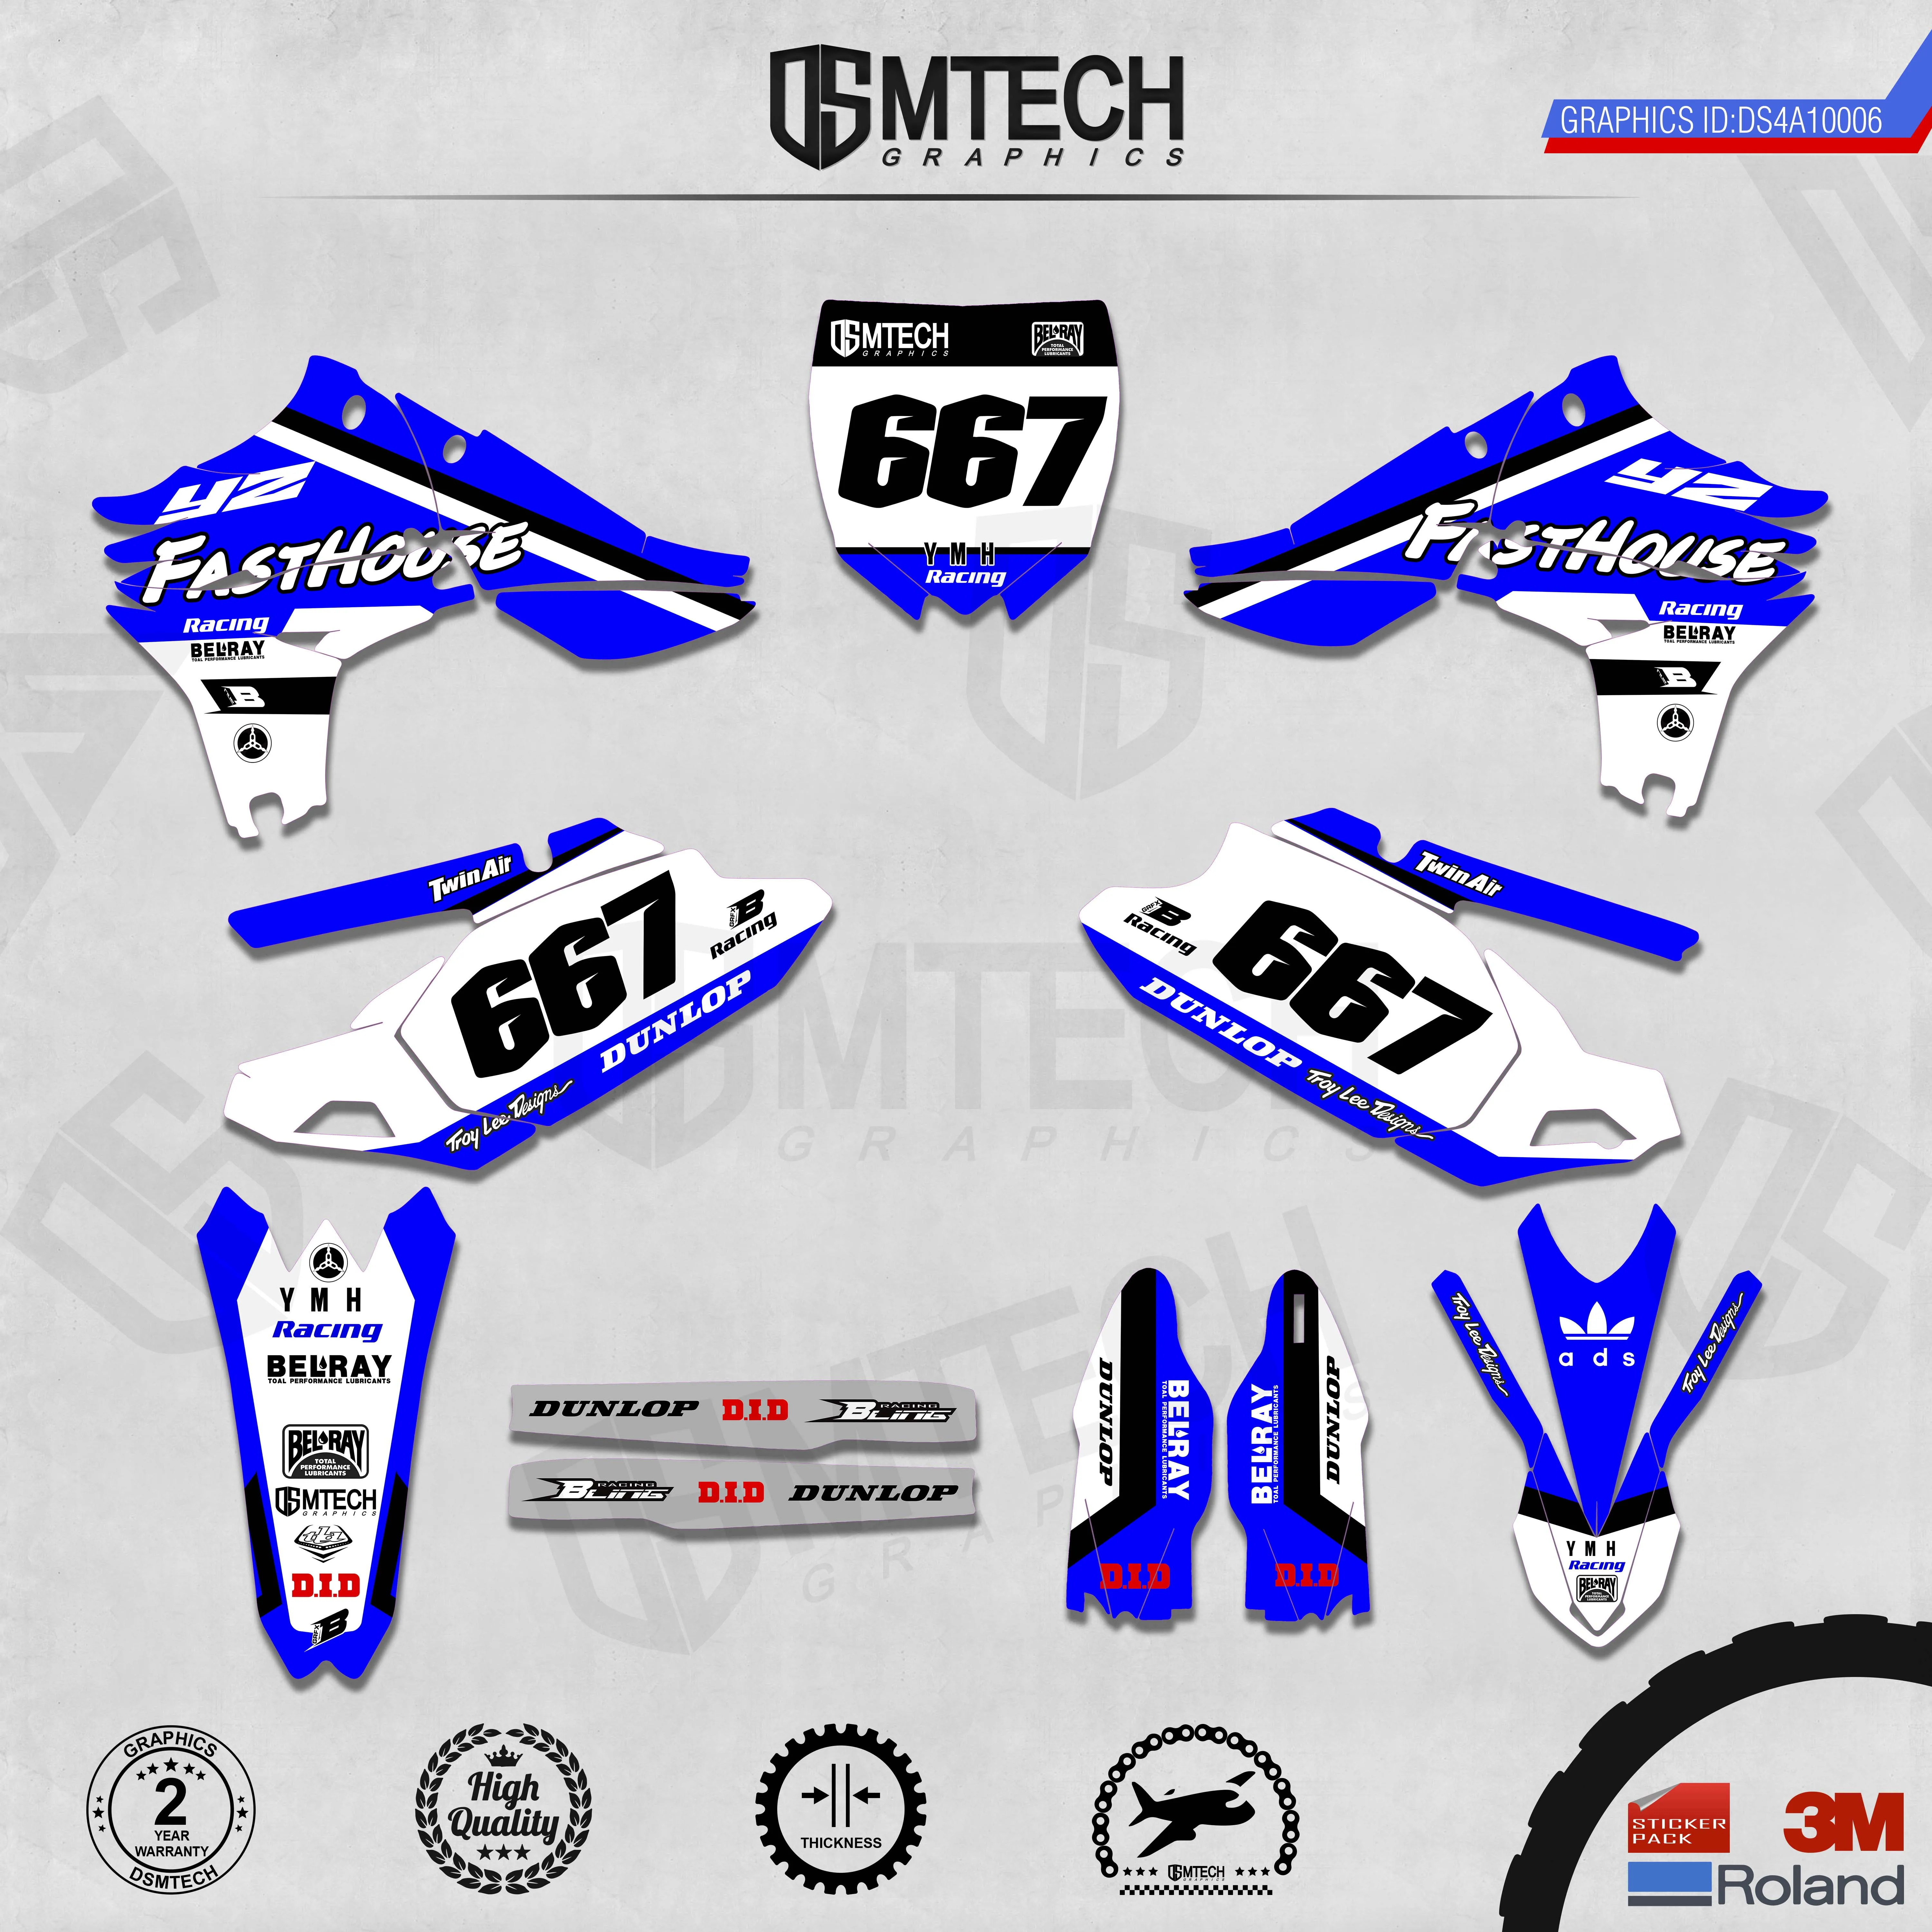 DSMTECH Customized Team Graphics Backgrounds Decals 3M Custom Stickers For  YZF450 Two Stroke 2010-2013  006